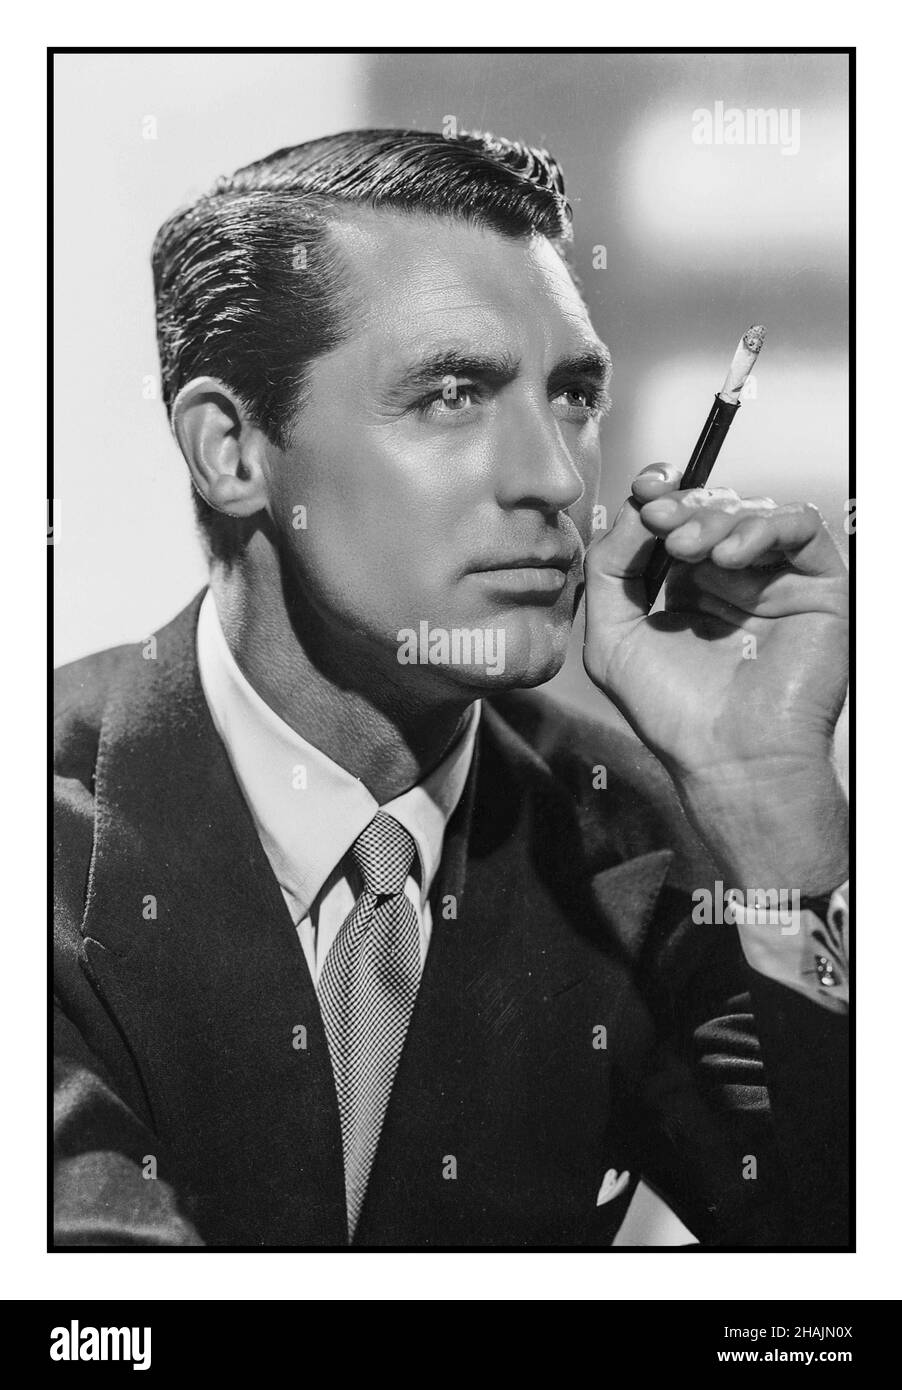 CARY GRANT Vintage Hollywood B&W studio portrait 1931 Cary Grant with cigarette holder and cigarette CARY GRANT (1904-1986) English-born American Hollywood heart throb film star Stock Photo